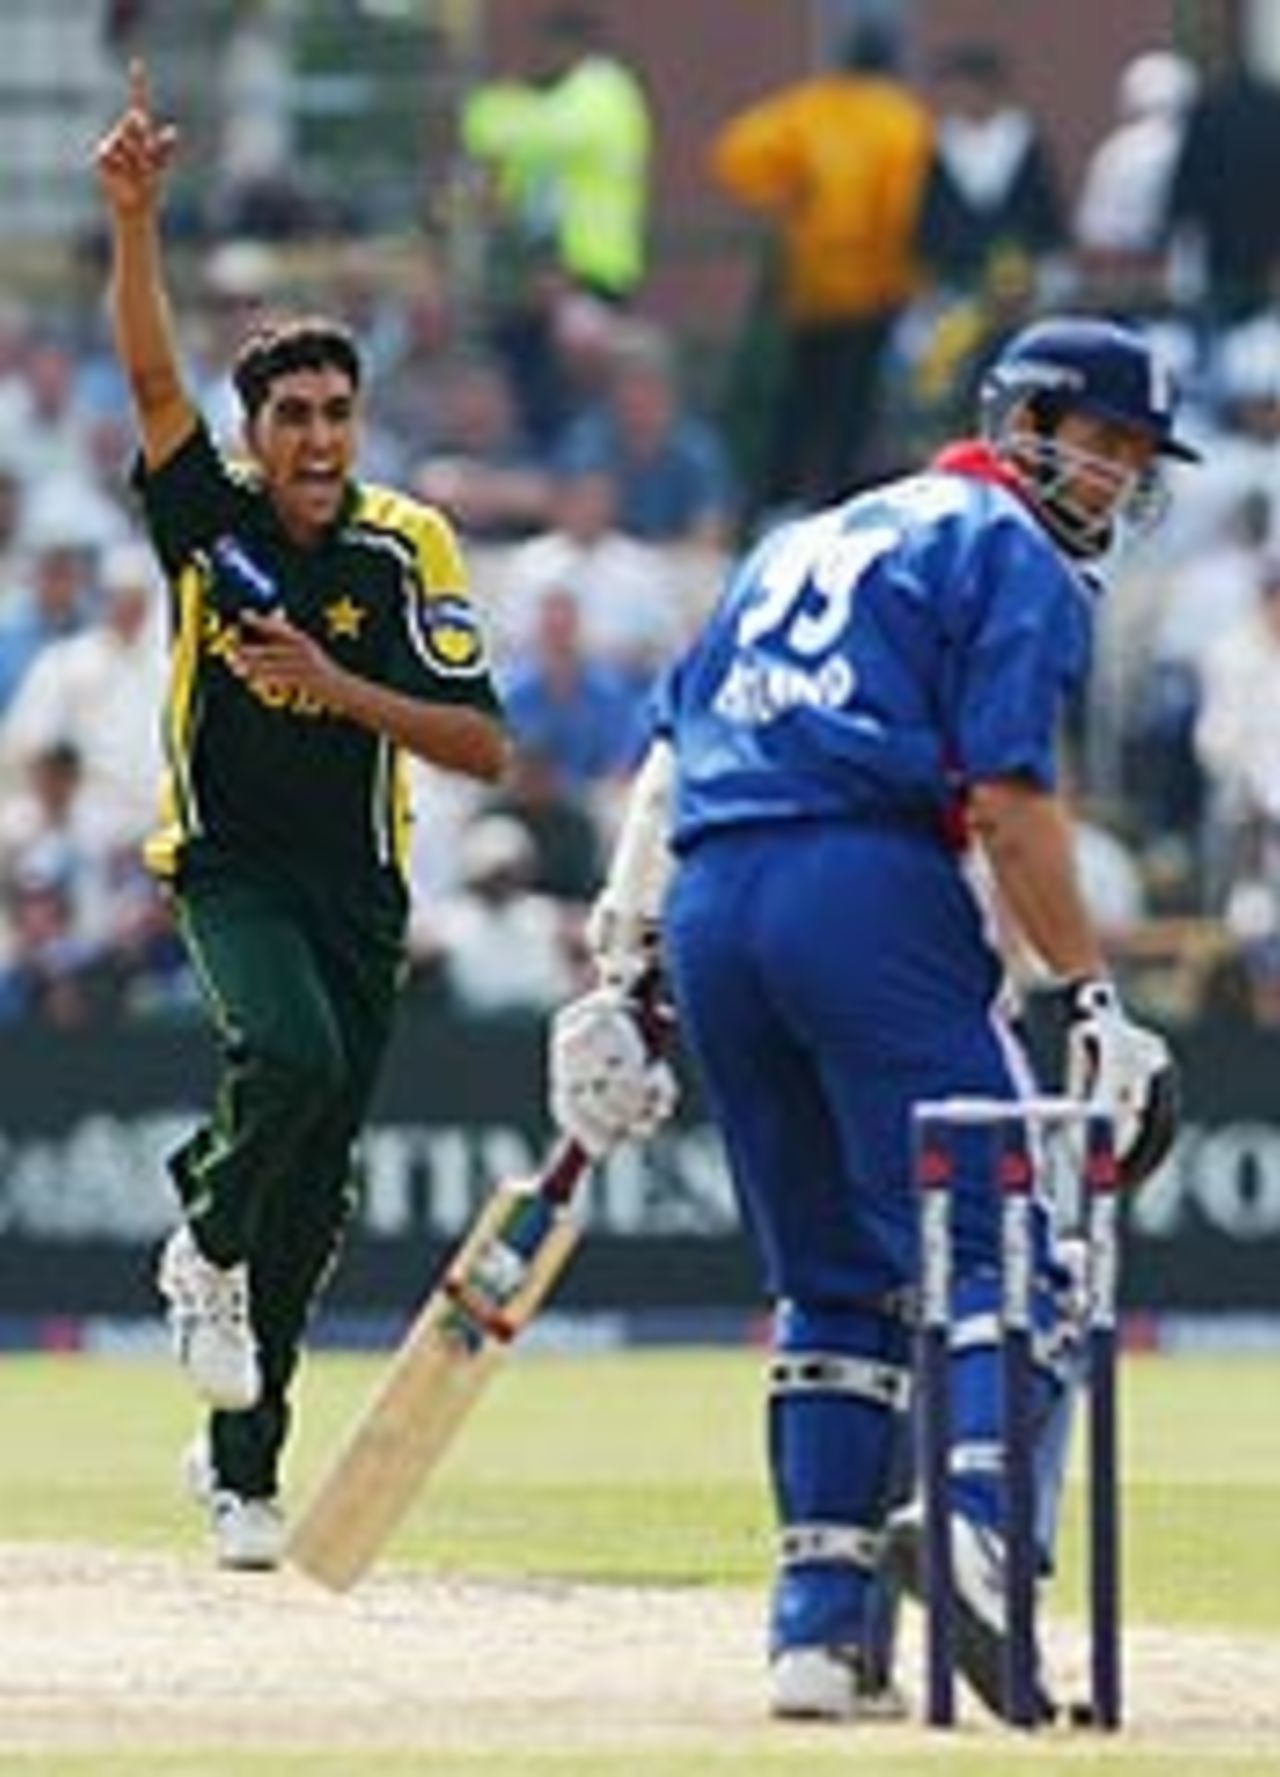 Umar Gul of Pakistan celebrates after taking the wicket of Michael Vaughan of England during the England v Pakistan NatWest Challenge match June 17, 2003